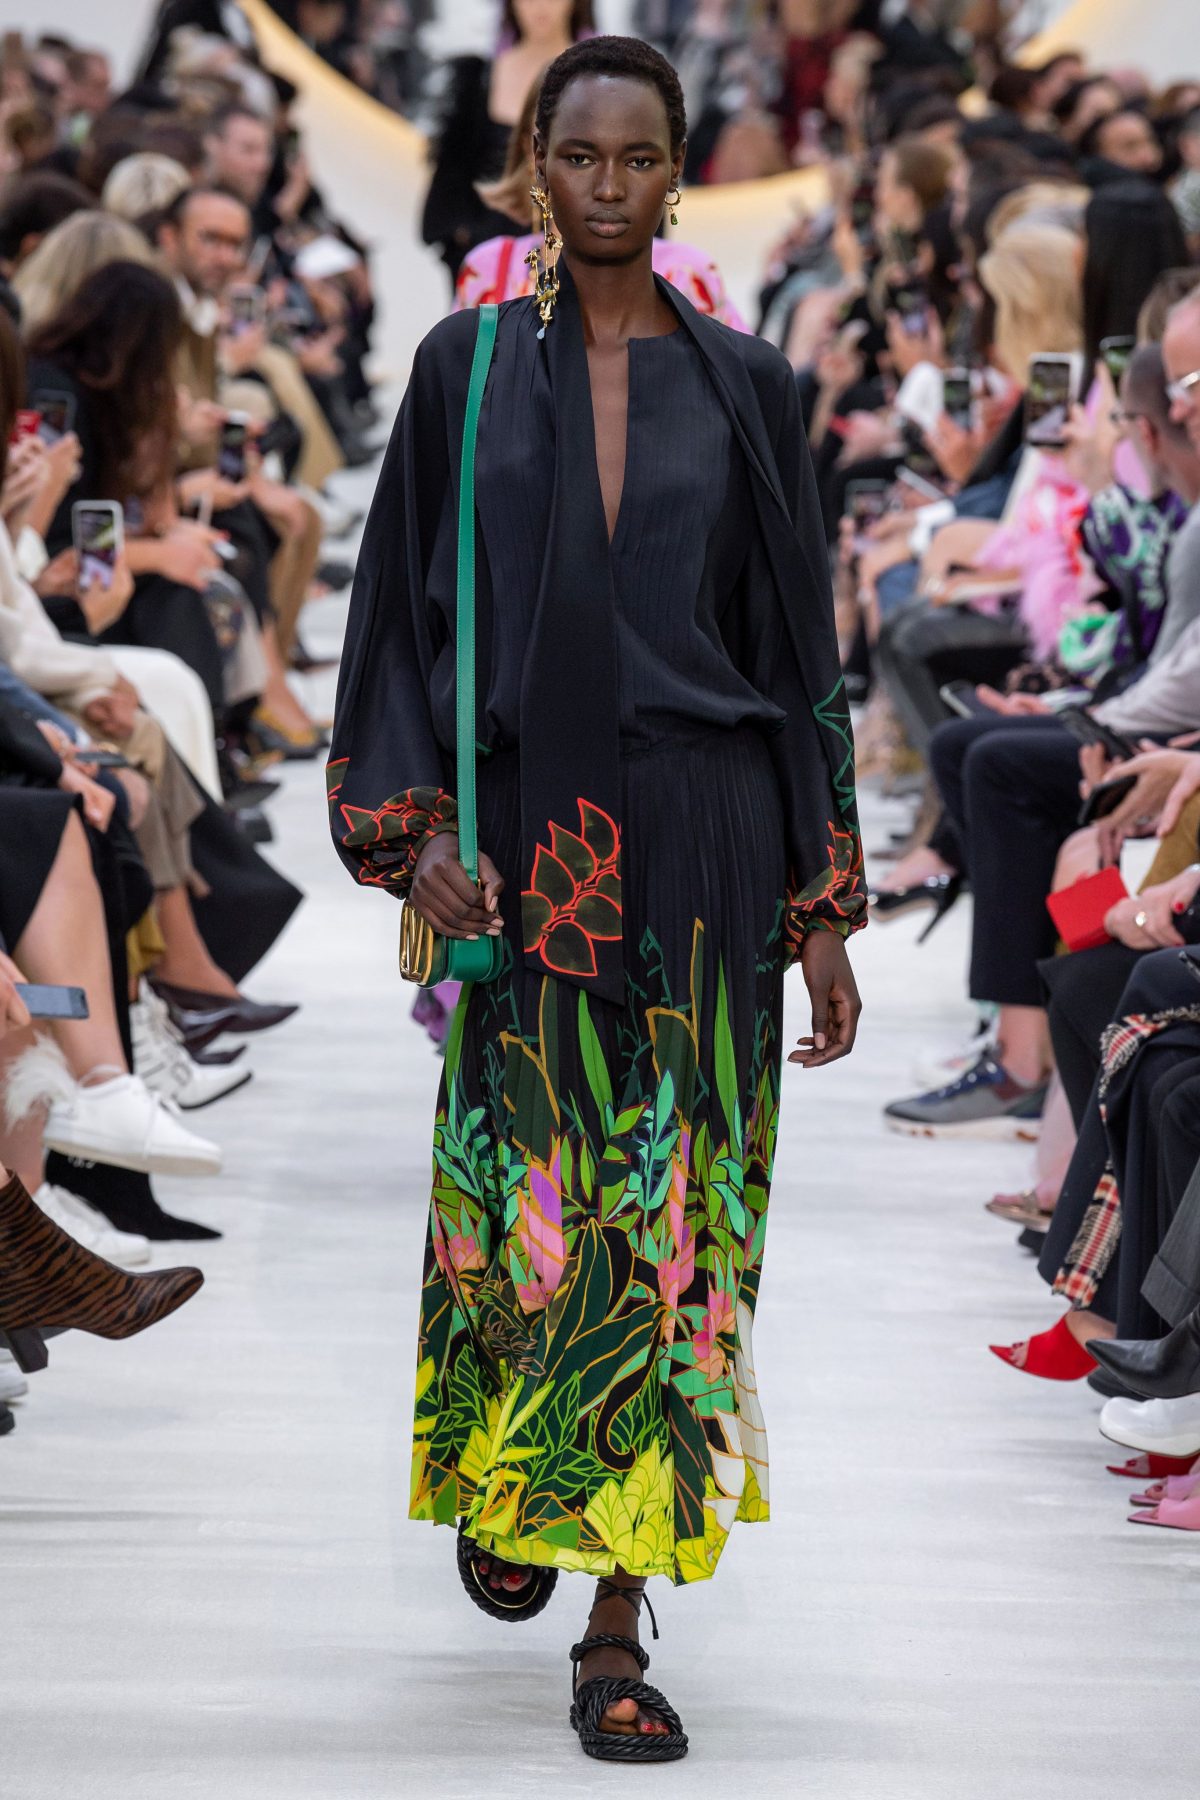 Valentino Spring/Summer 2020 Ready-to-Wear Show Review